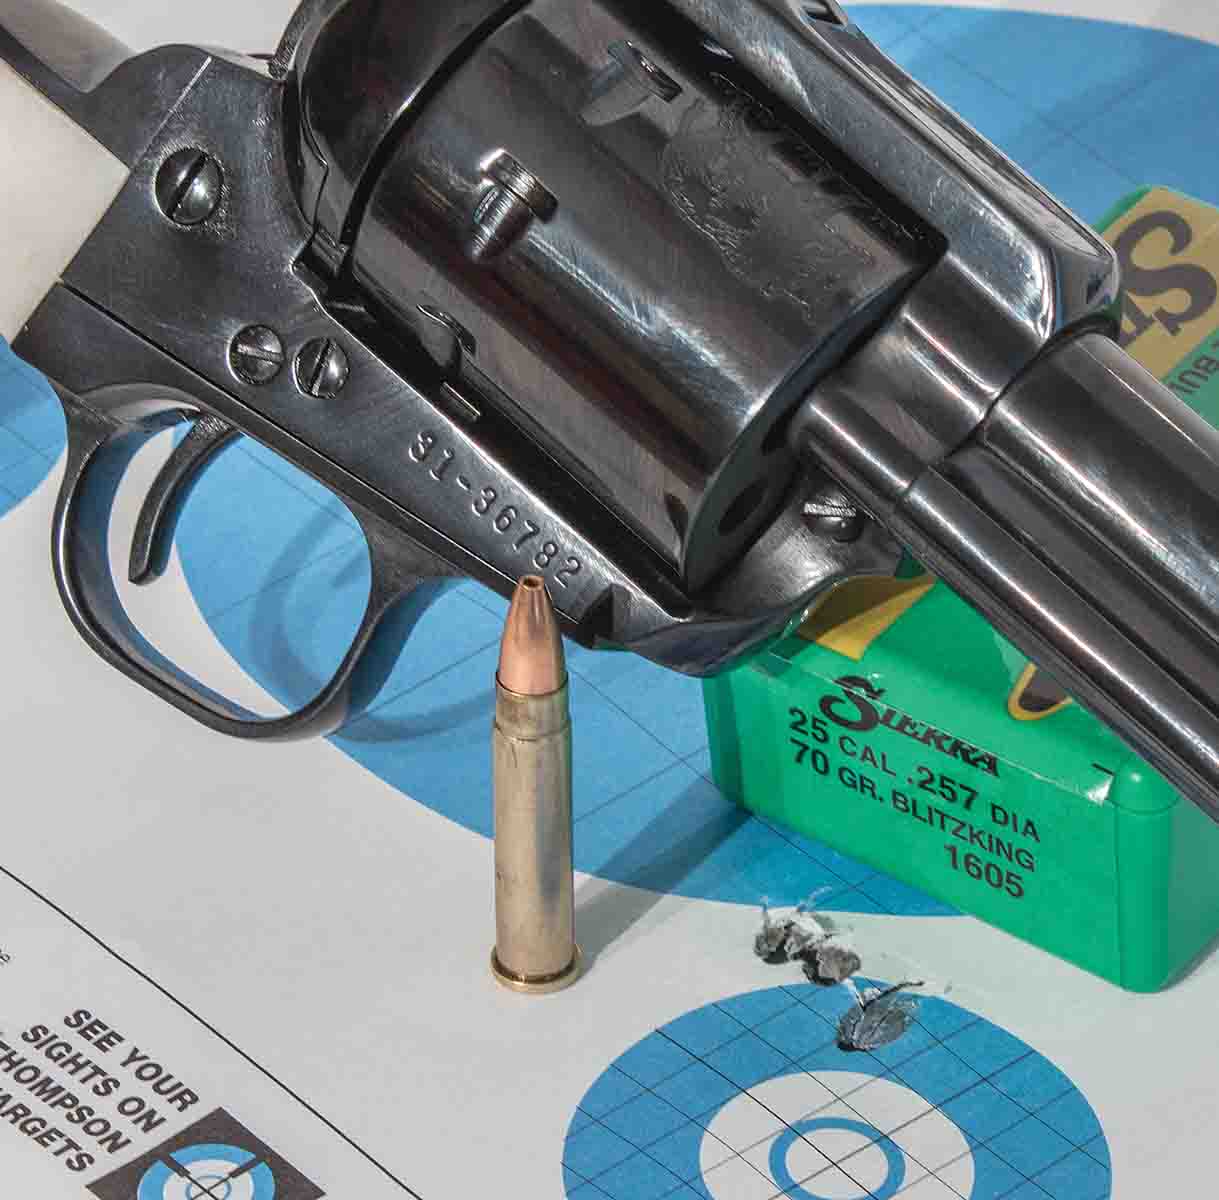 The 75-grain Sierra BlitzKing bullet shot exceptionally well out of the Reeder revolver, even though calculations said it needed a 1:12 twist, and entry holes were minutely oval.